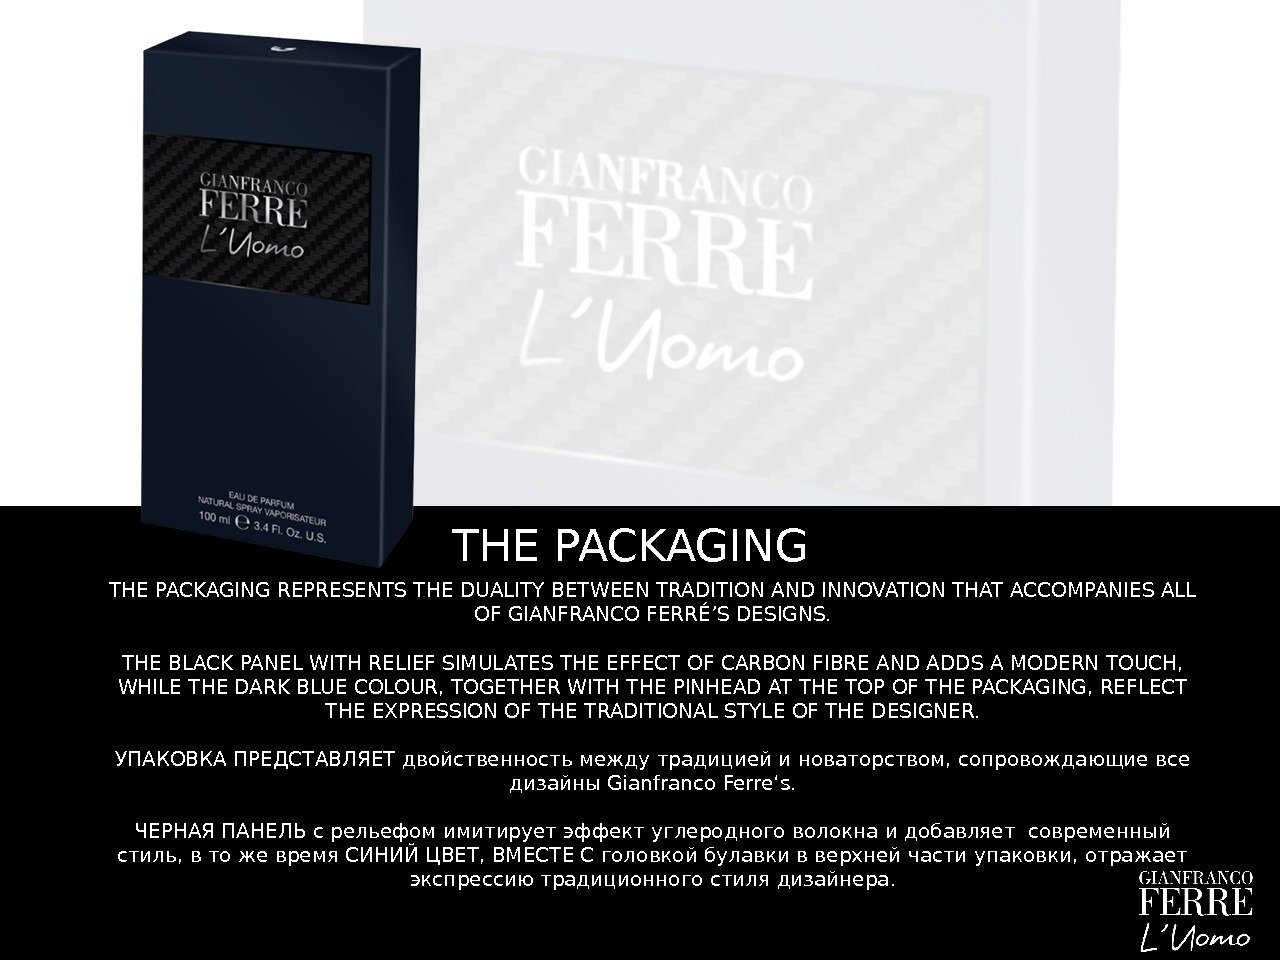 THE PACKAGING REPRESENTS THE DUALITY BETWEEN TRADITION AND INNOVATION THAT ACCOMPANIES ALL OF GIANFRANCO